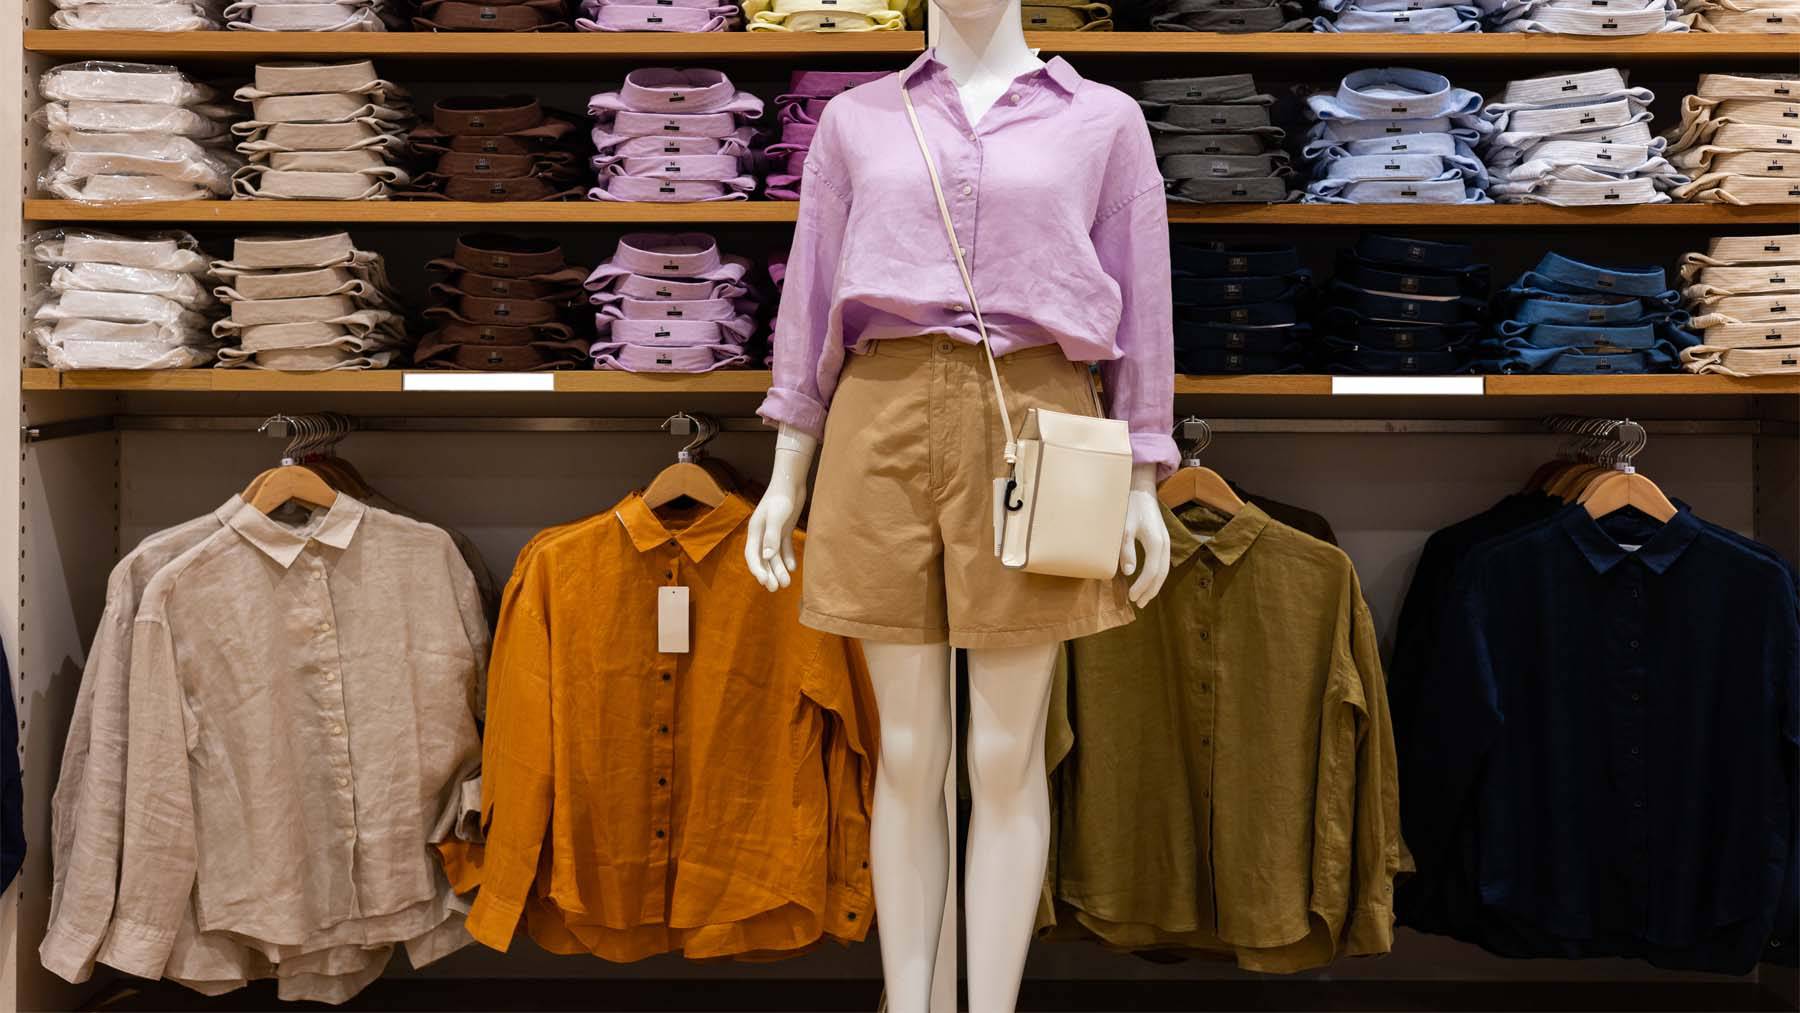 How to Sell Clothes During a Supply Chain Crisis